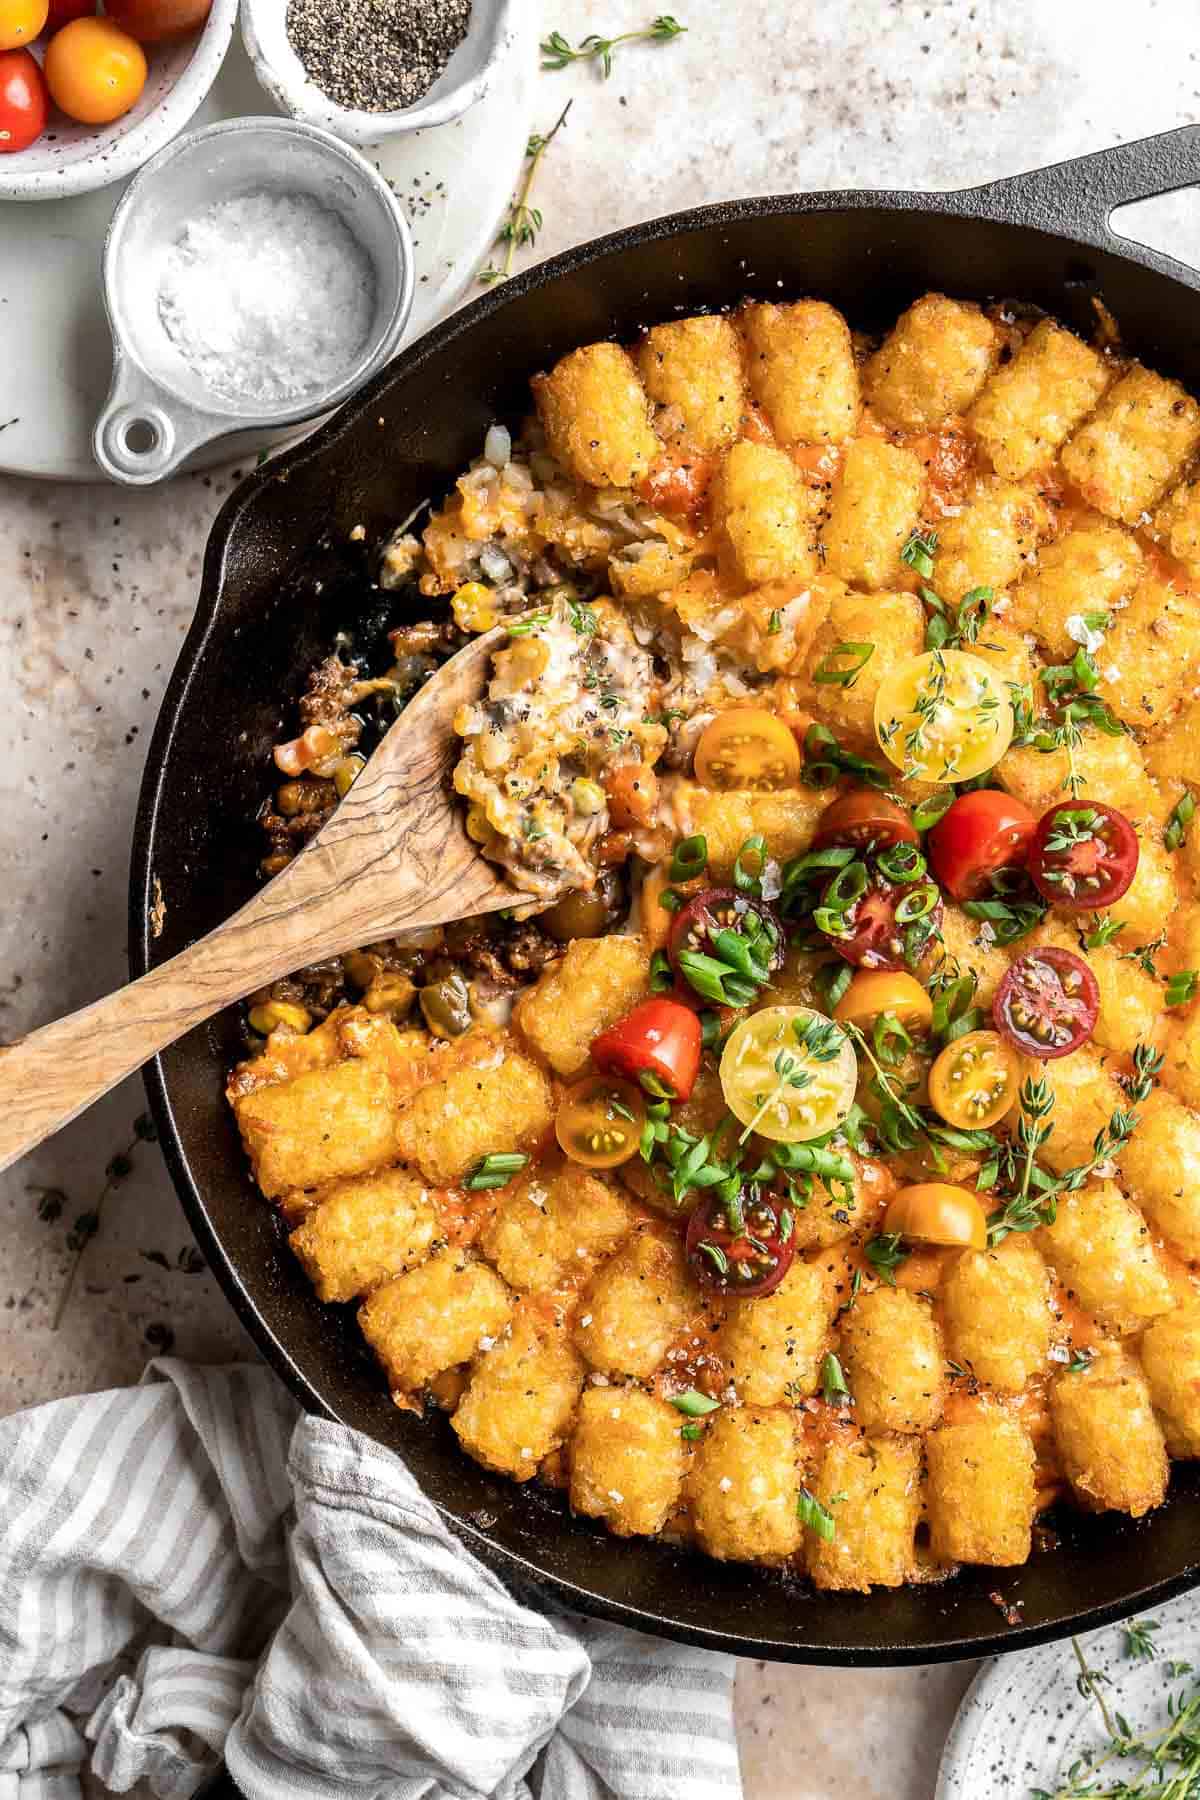 Tater Tot Casserole is classic comfort food that incorporates delicious layers of crispy tater tots, melted cheese and a creamy beef and vegetables mixture. | aheadofthyme.com